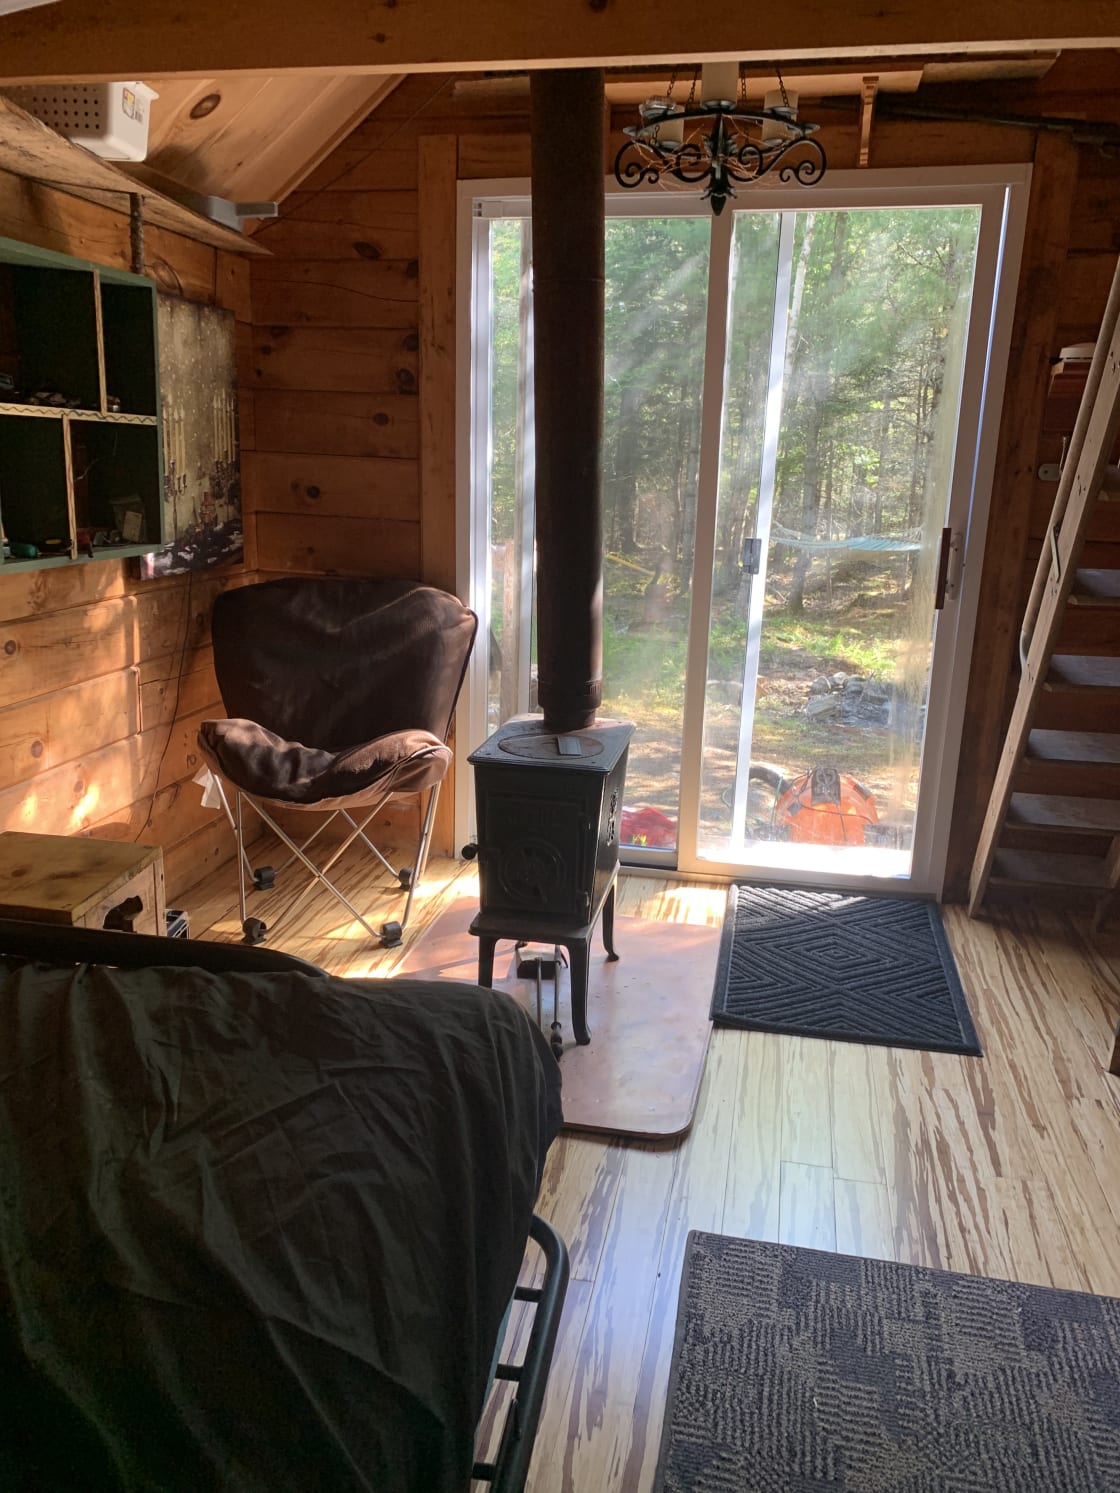 Inside cabin looking out